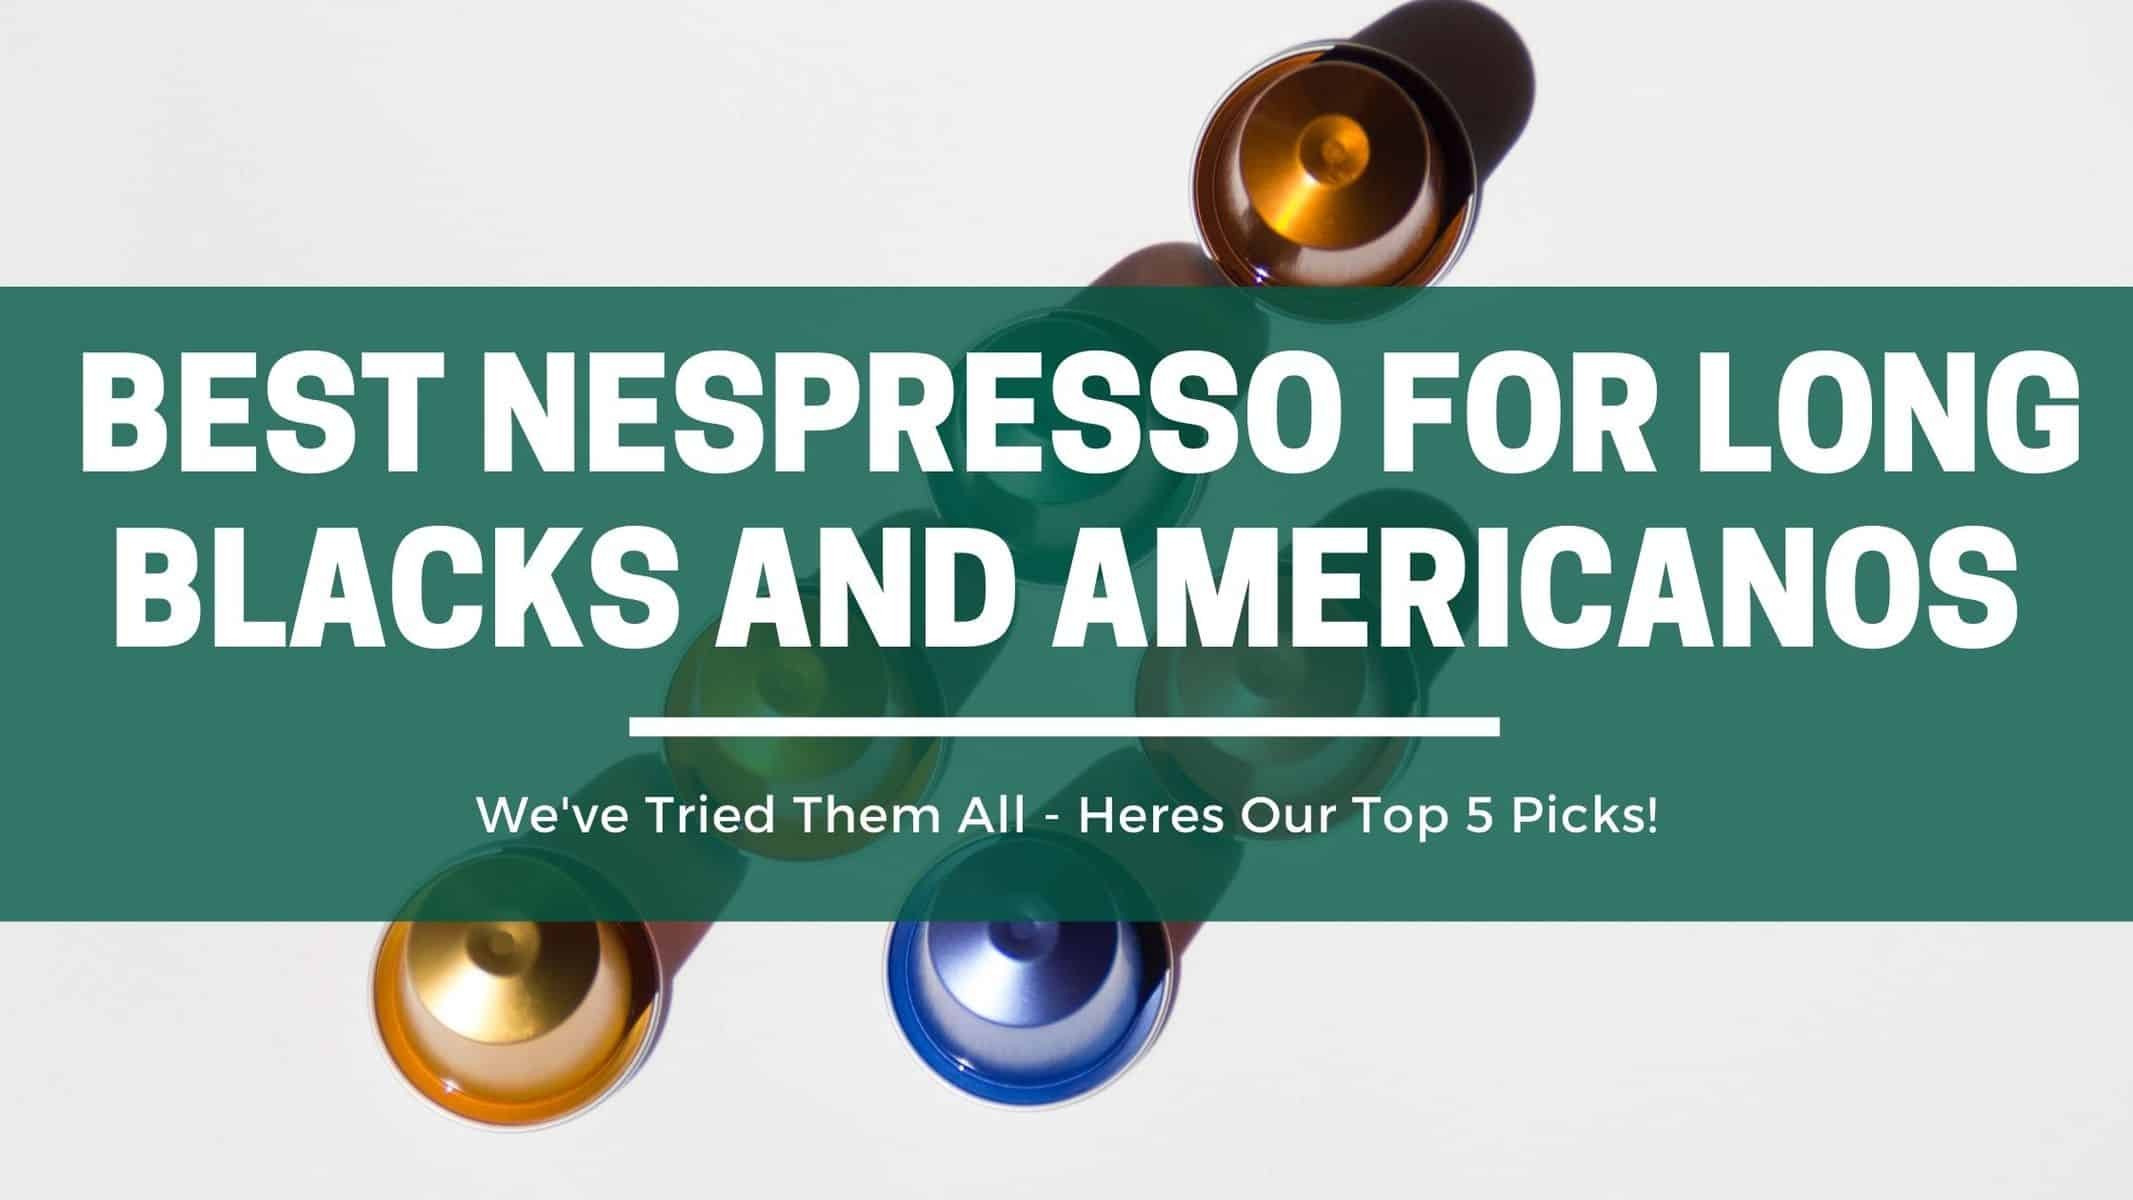 The 5 Capsules For Long Blacks and Americanos – The Green Pods